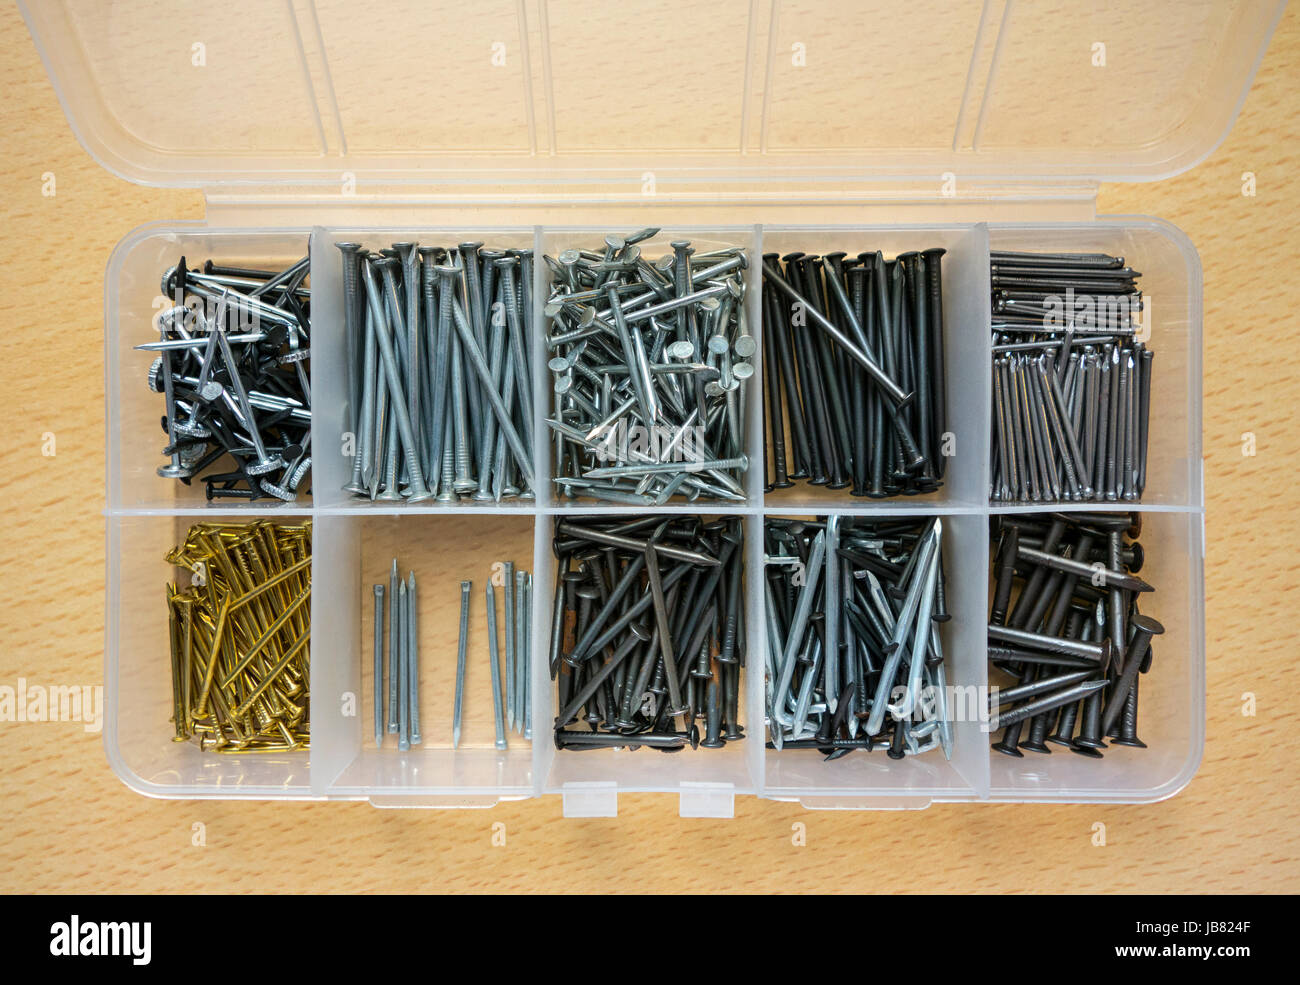 A handyman's box of assorted picture-hanging pins and nails Stock Photo